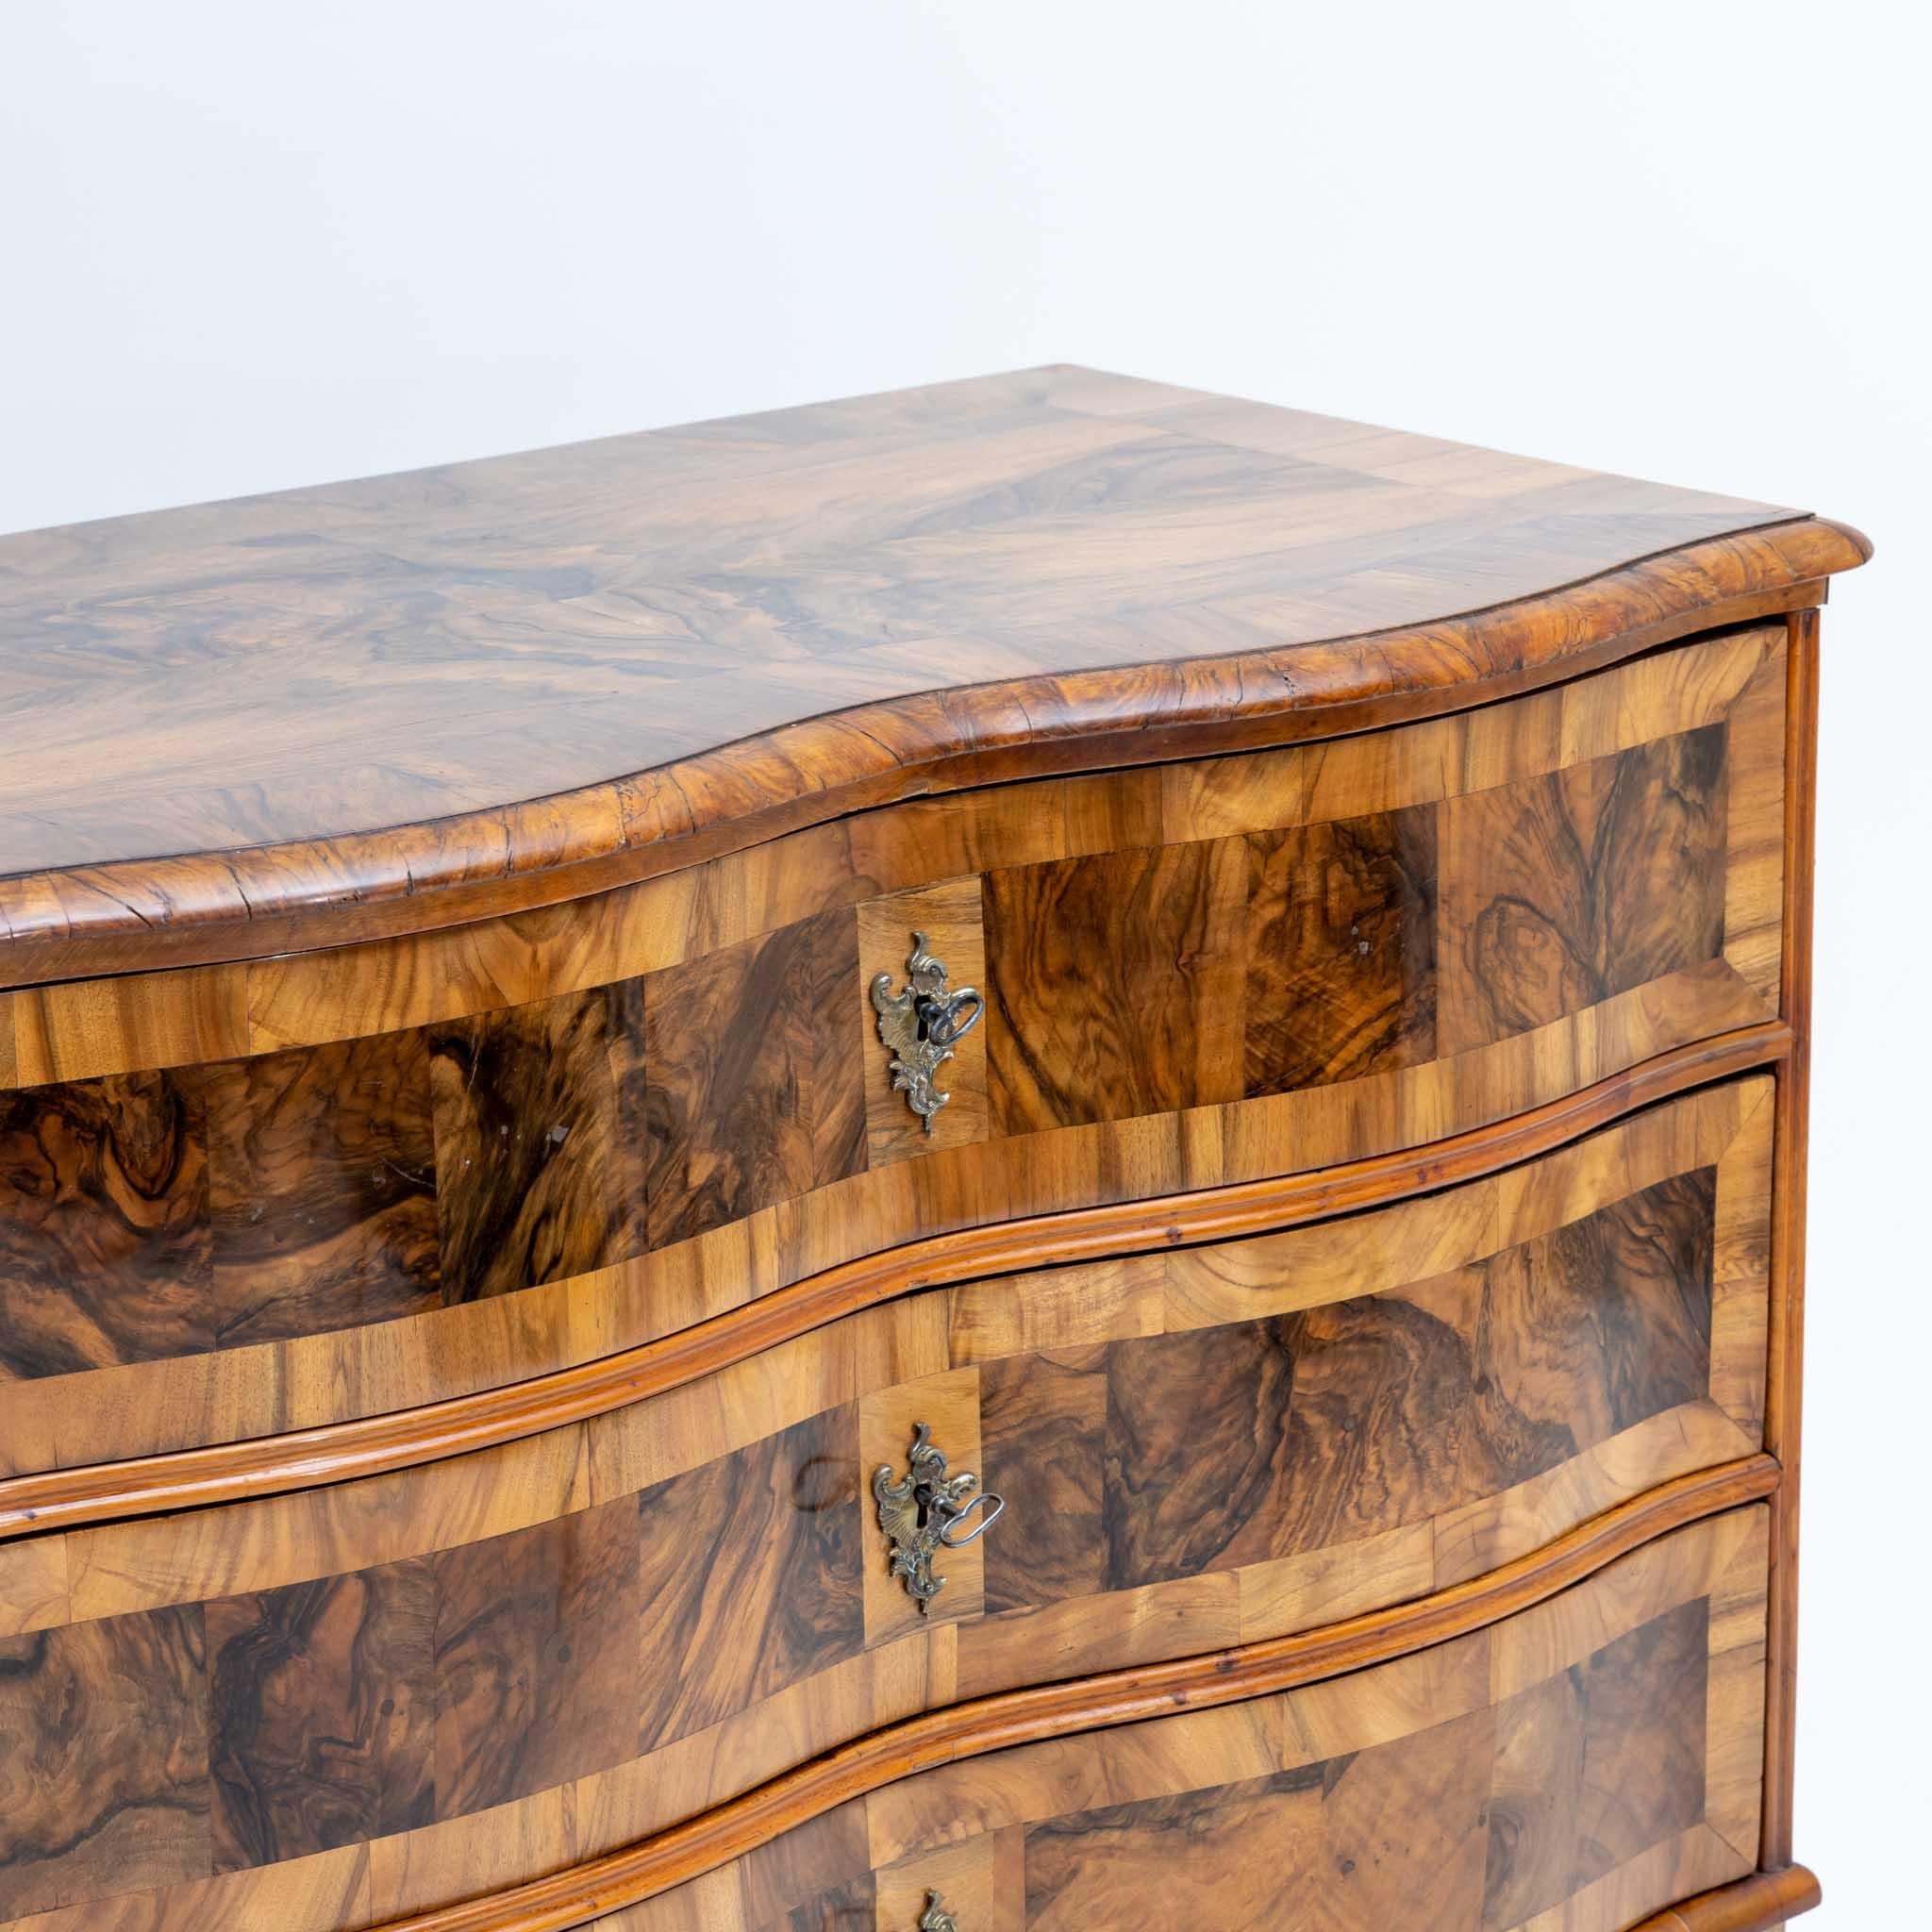 Baroque Chest of Drawers, hand-polished Walnut Veneer, Germany, Mid-18th Century 4